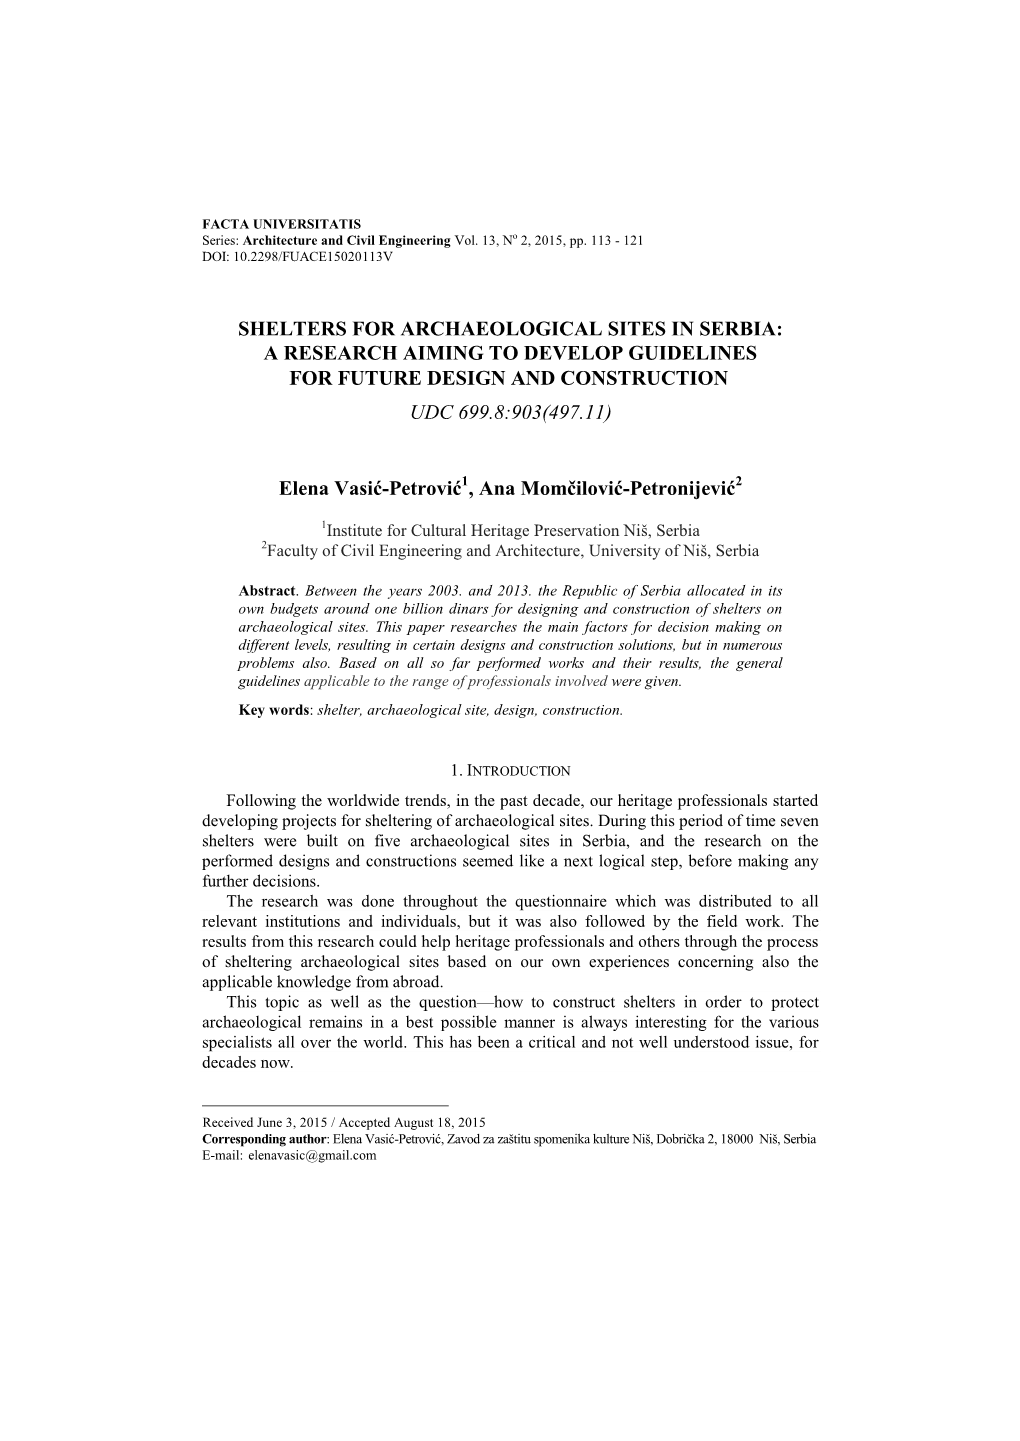 Shelters for Archaeological Sites in Serbia: a Research Aiming to Develop Guidelines for Future Design and Construction Udc 699.8:903(497.11)